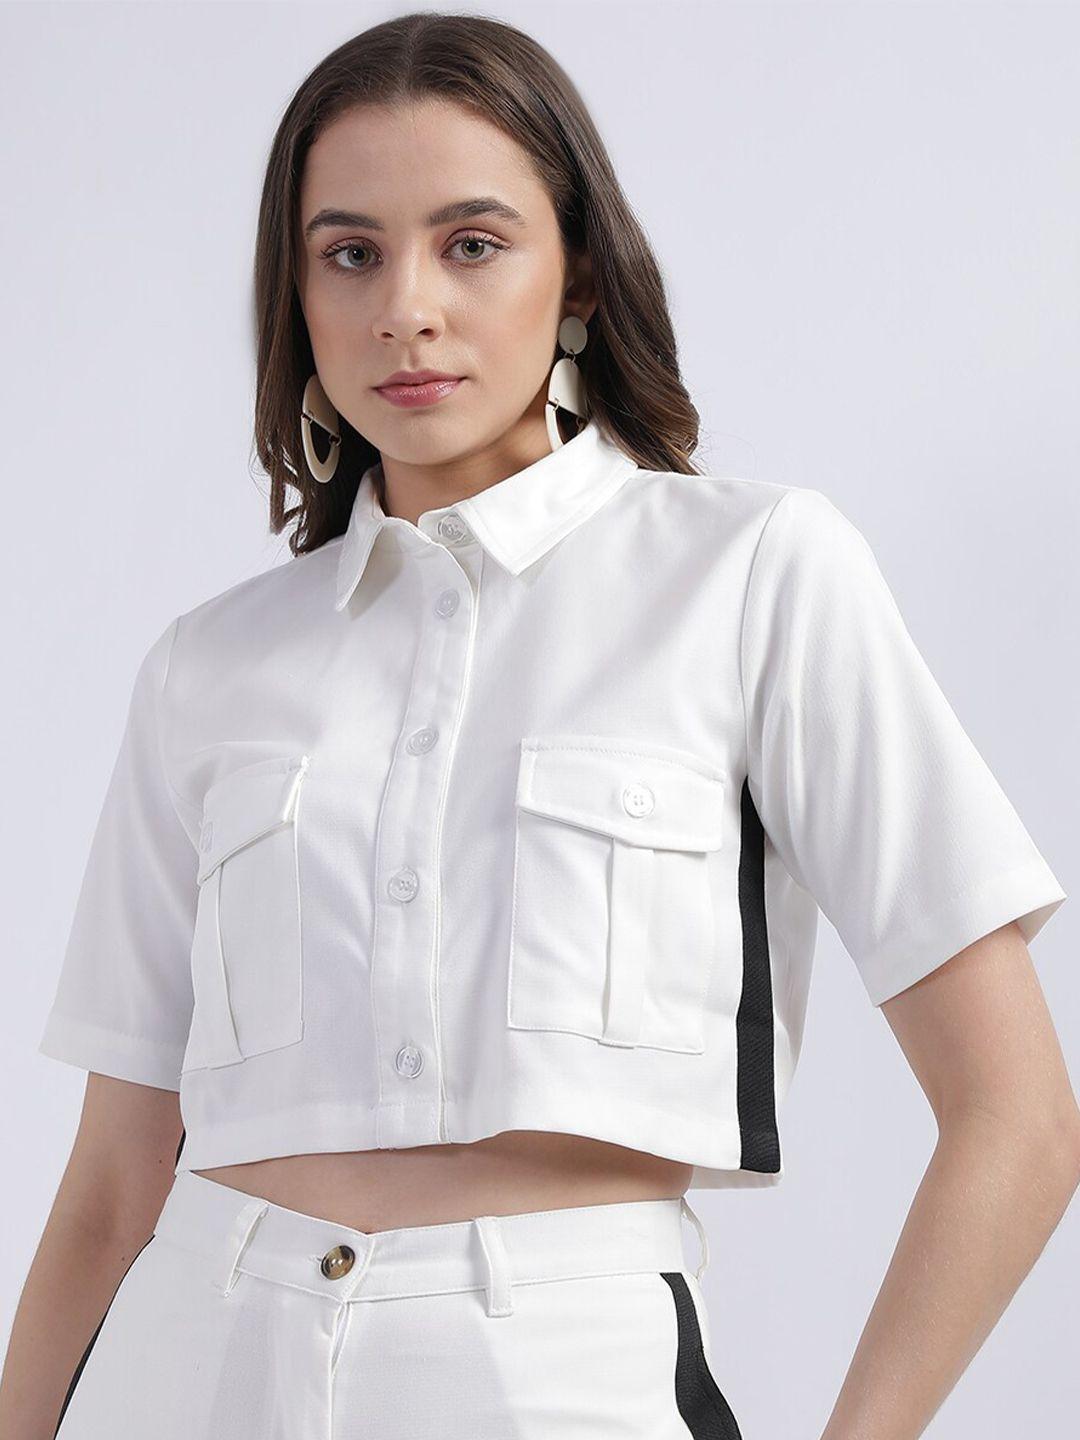 centrestage off white shirt style crop top